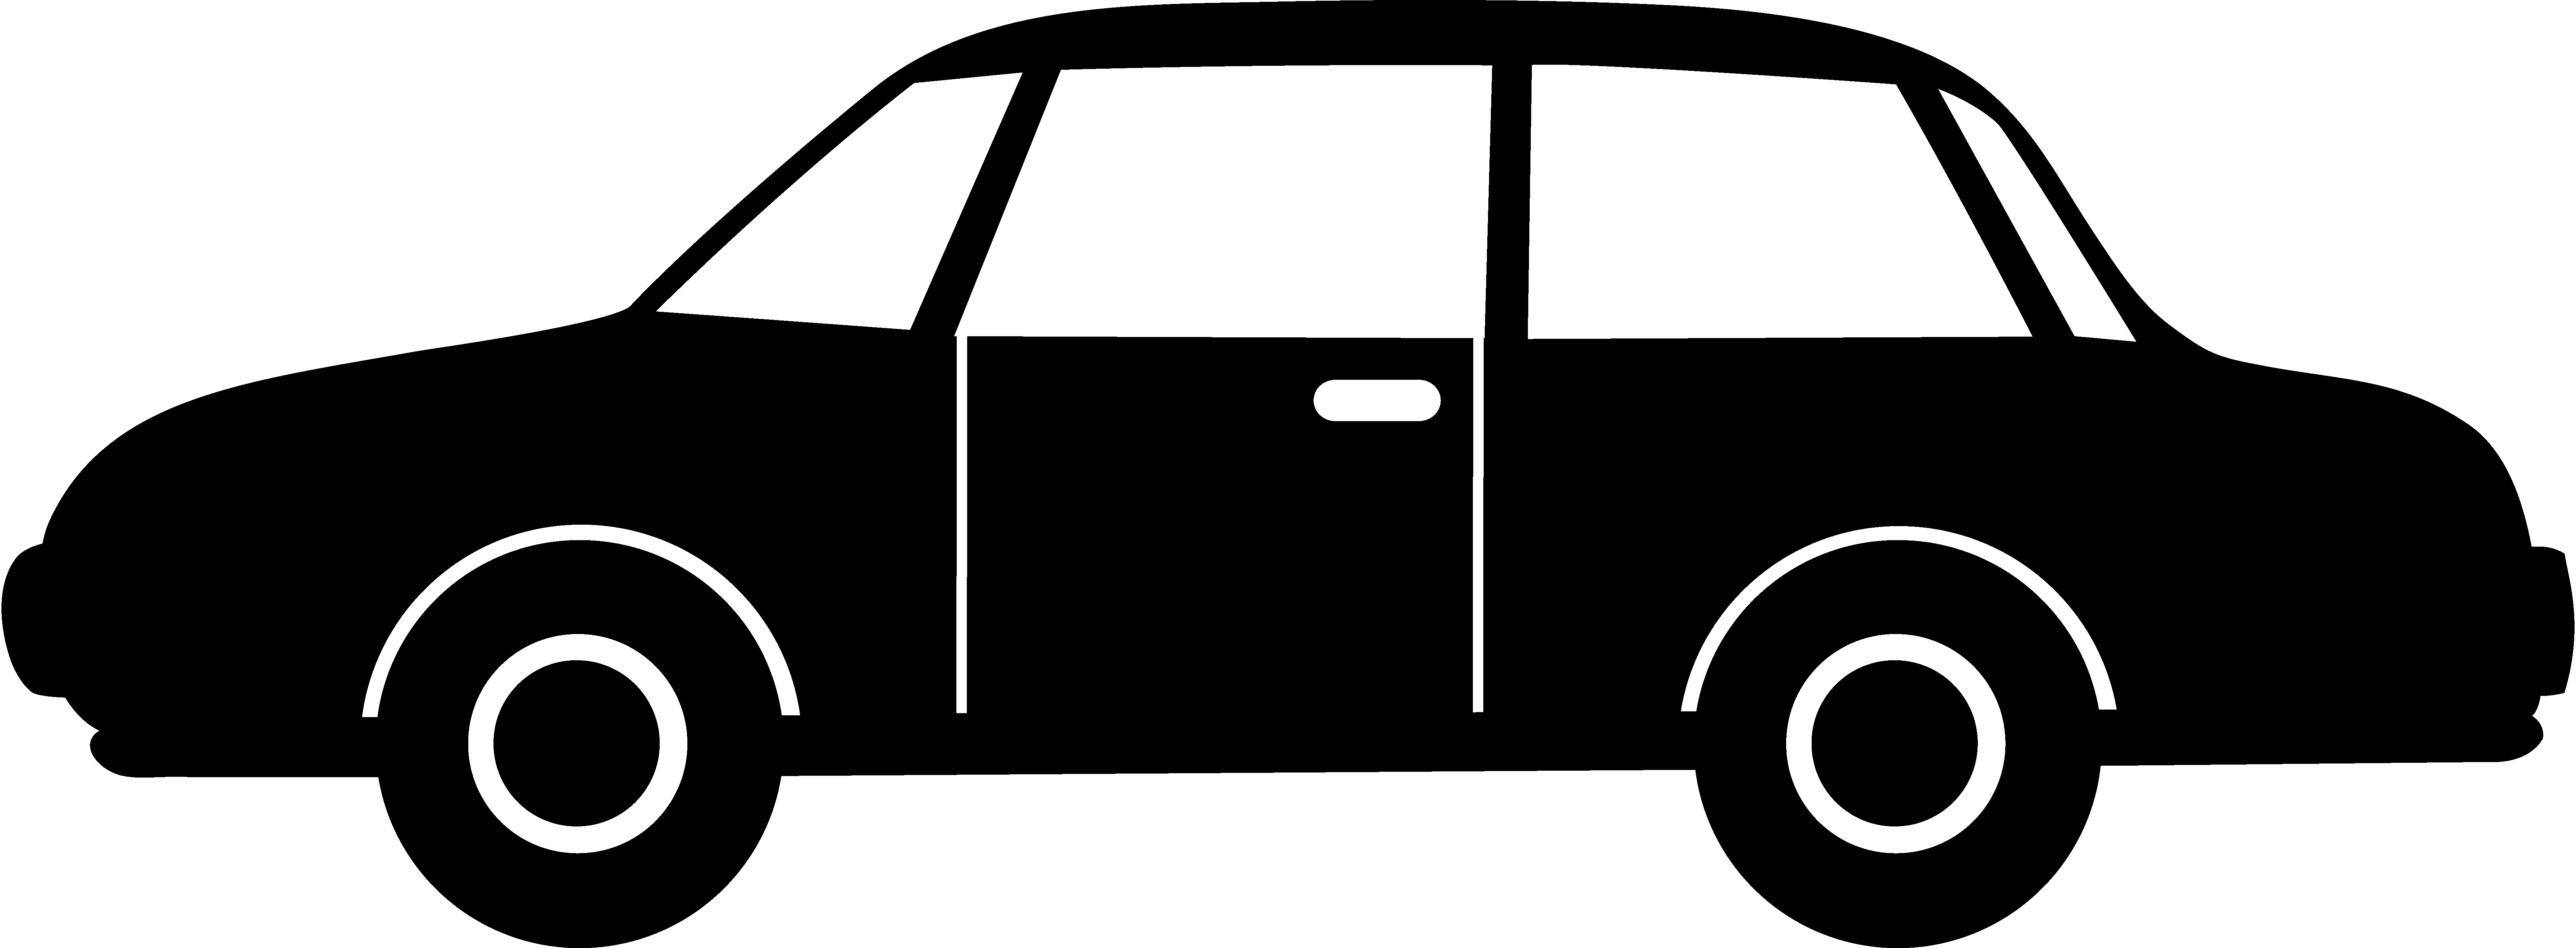 Toy Car Clipart Black And Whi - Free Clip Art Cars